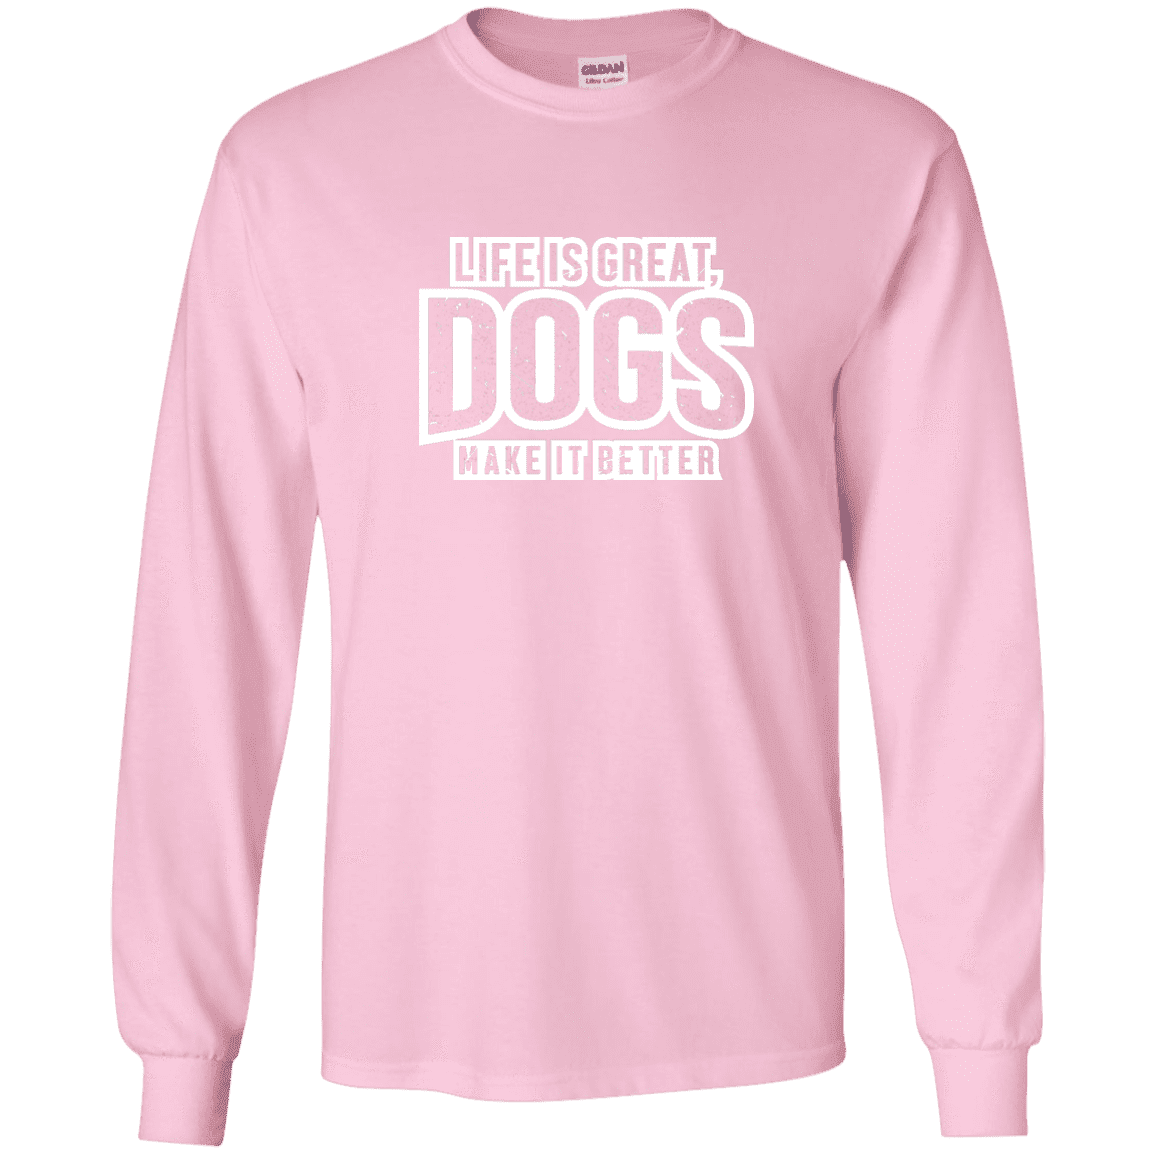 Life Is Great Dogs - Long Sleeve T Shirt.